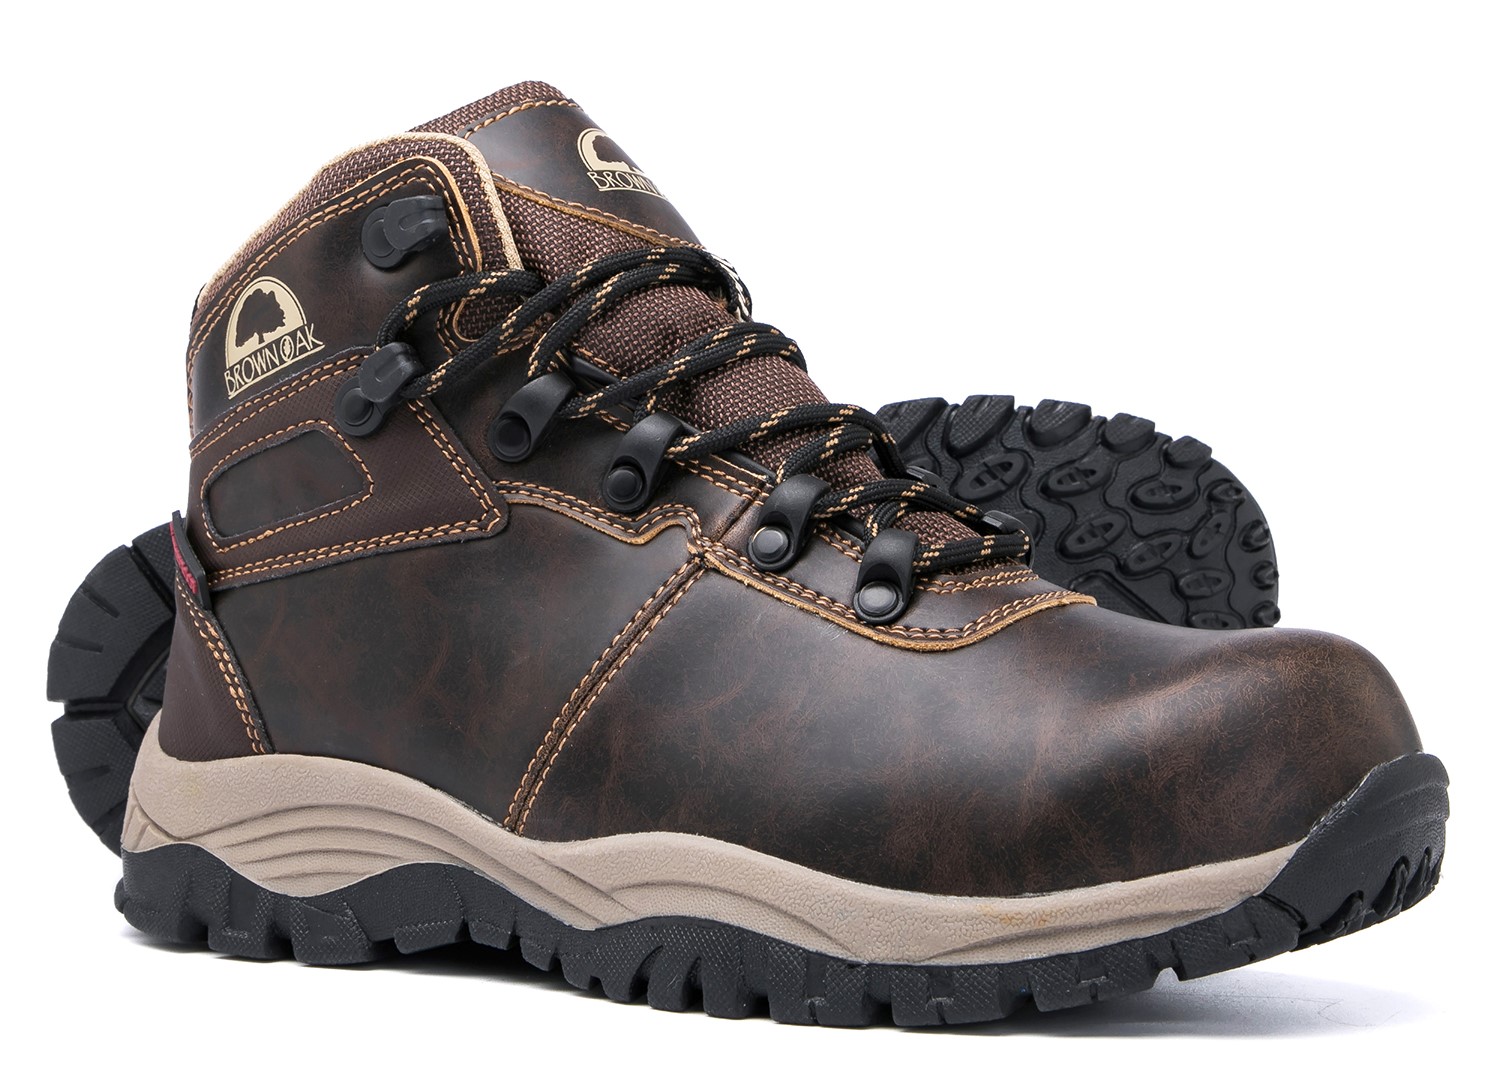 Brown Oak Womens Waterproof Trekking Camping Backpacking Outdoor Shoes Hiking Boots - image 2 of 7